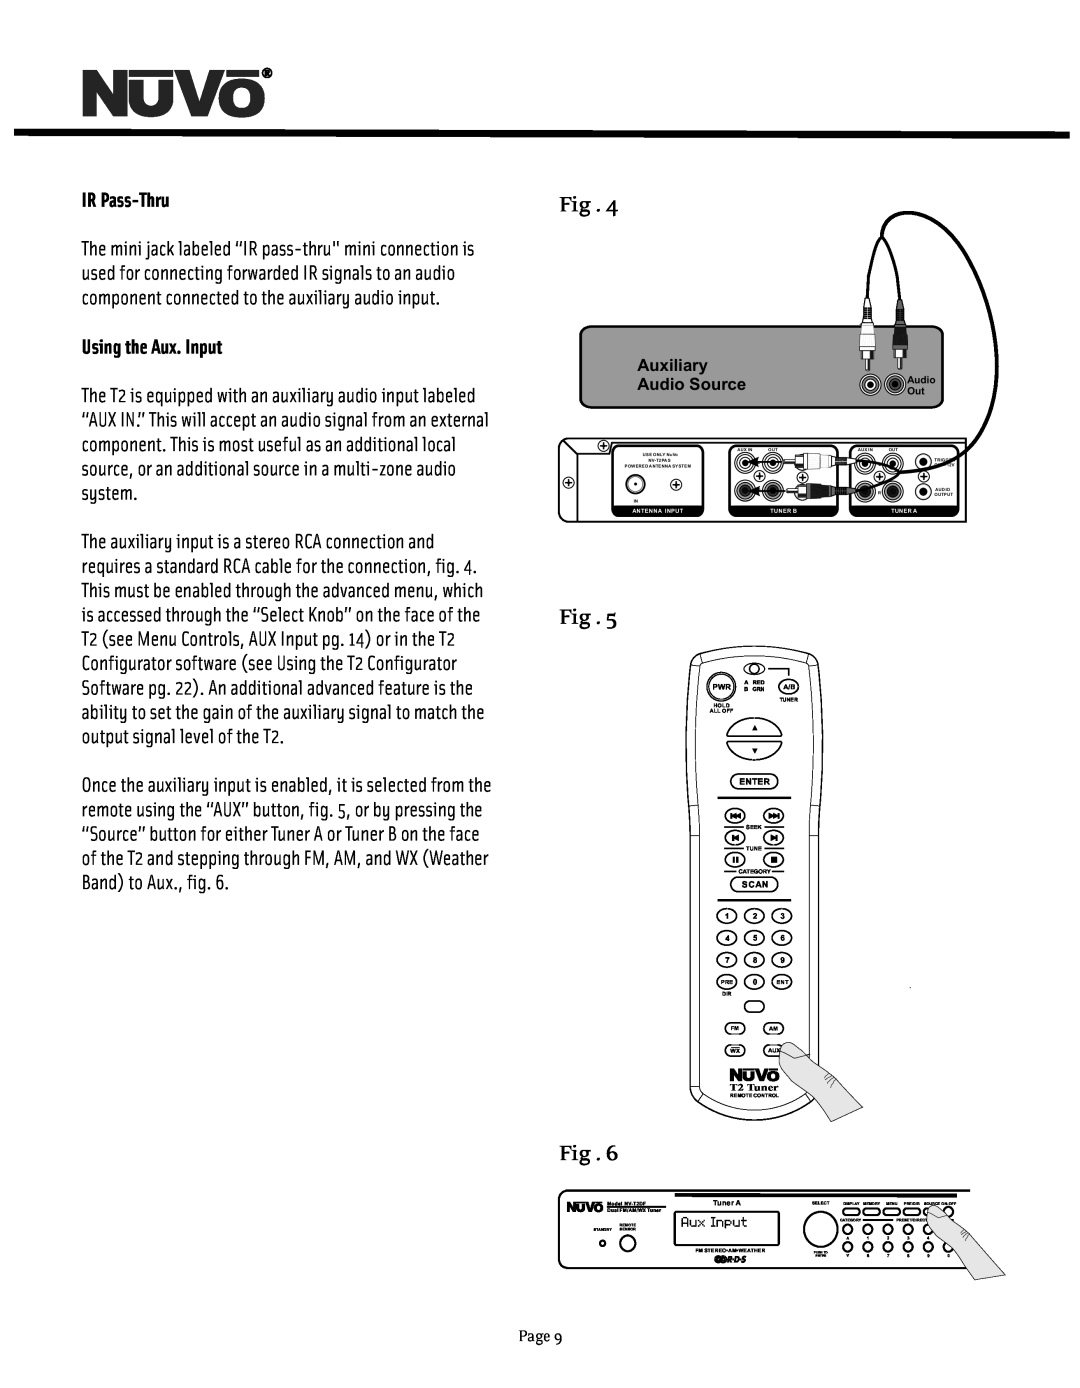 Nuvo NV-T2DF manual IR Pass-Thru, Using the Aux. Input, Page, Auxiliary, Audio Source 